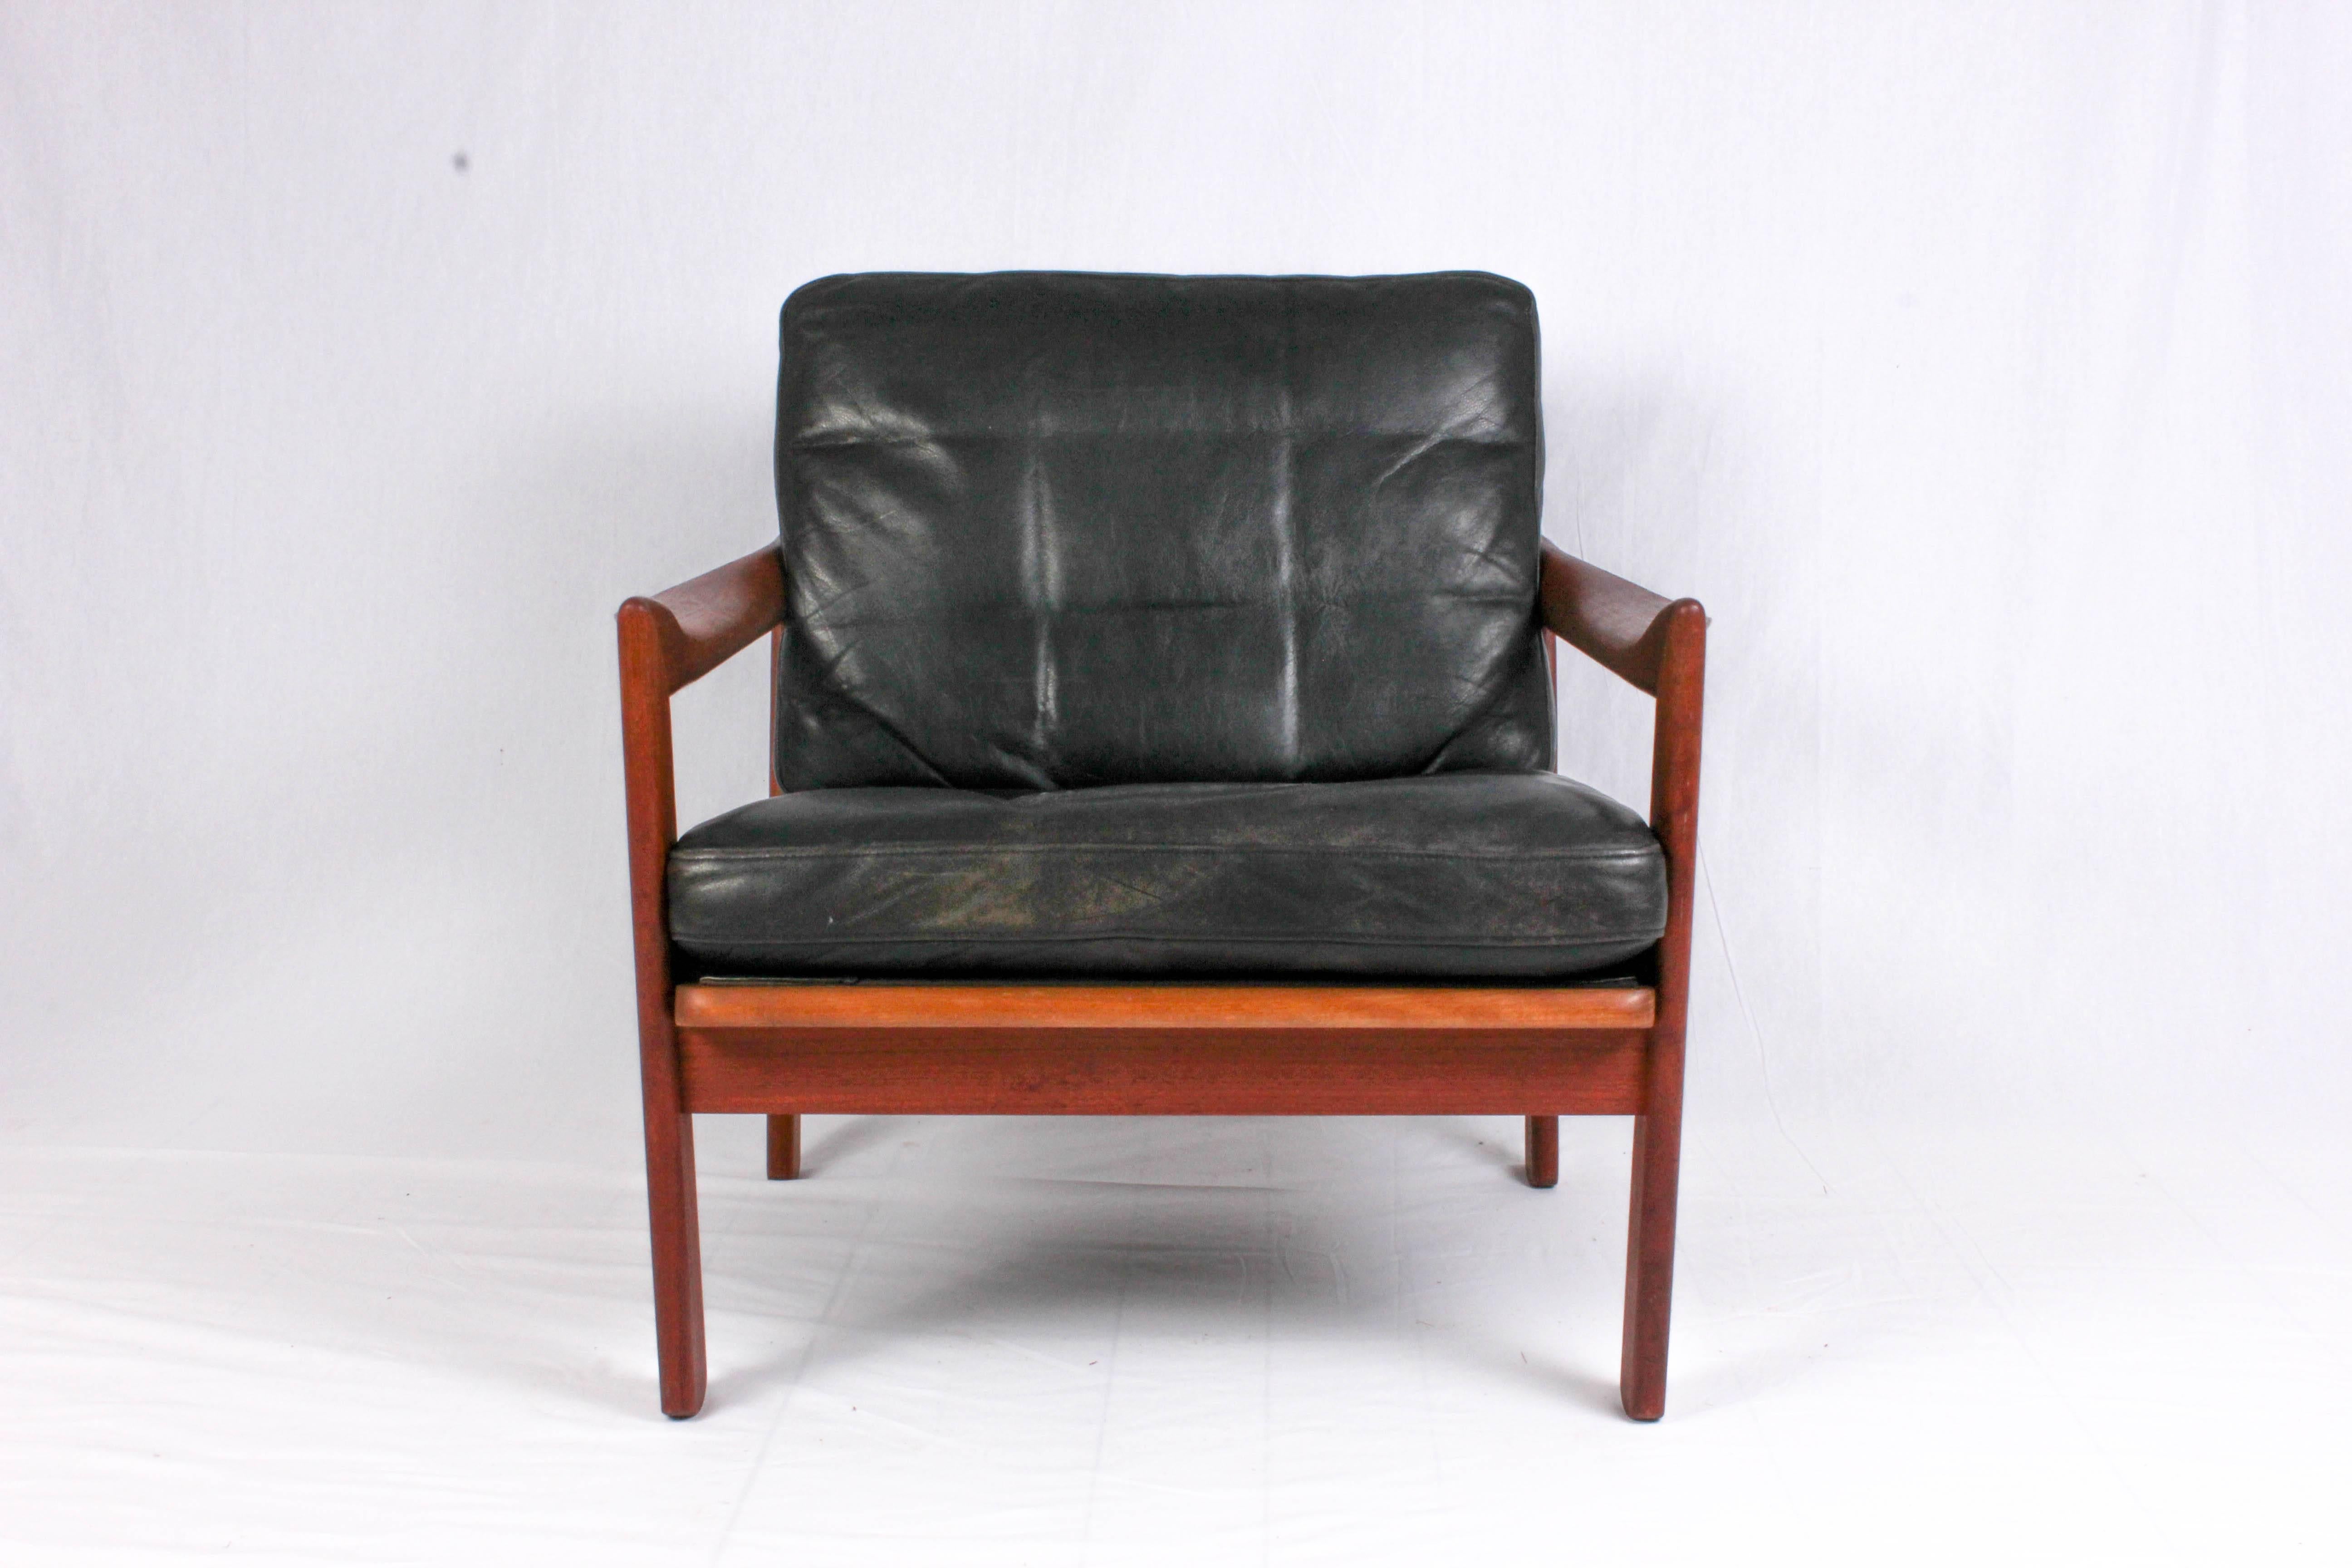 This midcentury teak armchair is designed by Danish designer Illum Wikkelsø and produced by Niels Eilersen. The chair has beautiful twisted armrests and leather upholstery with minor signs of usage and patina. A very decorative and comfortable chair